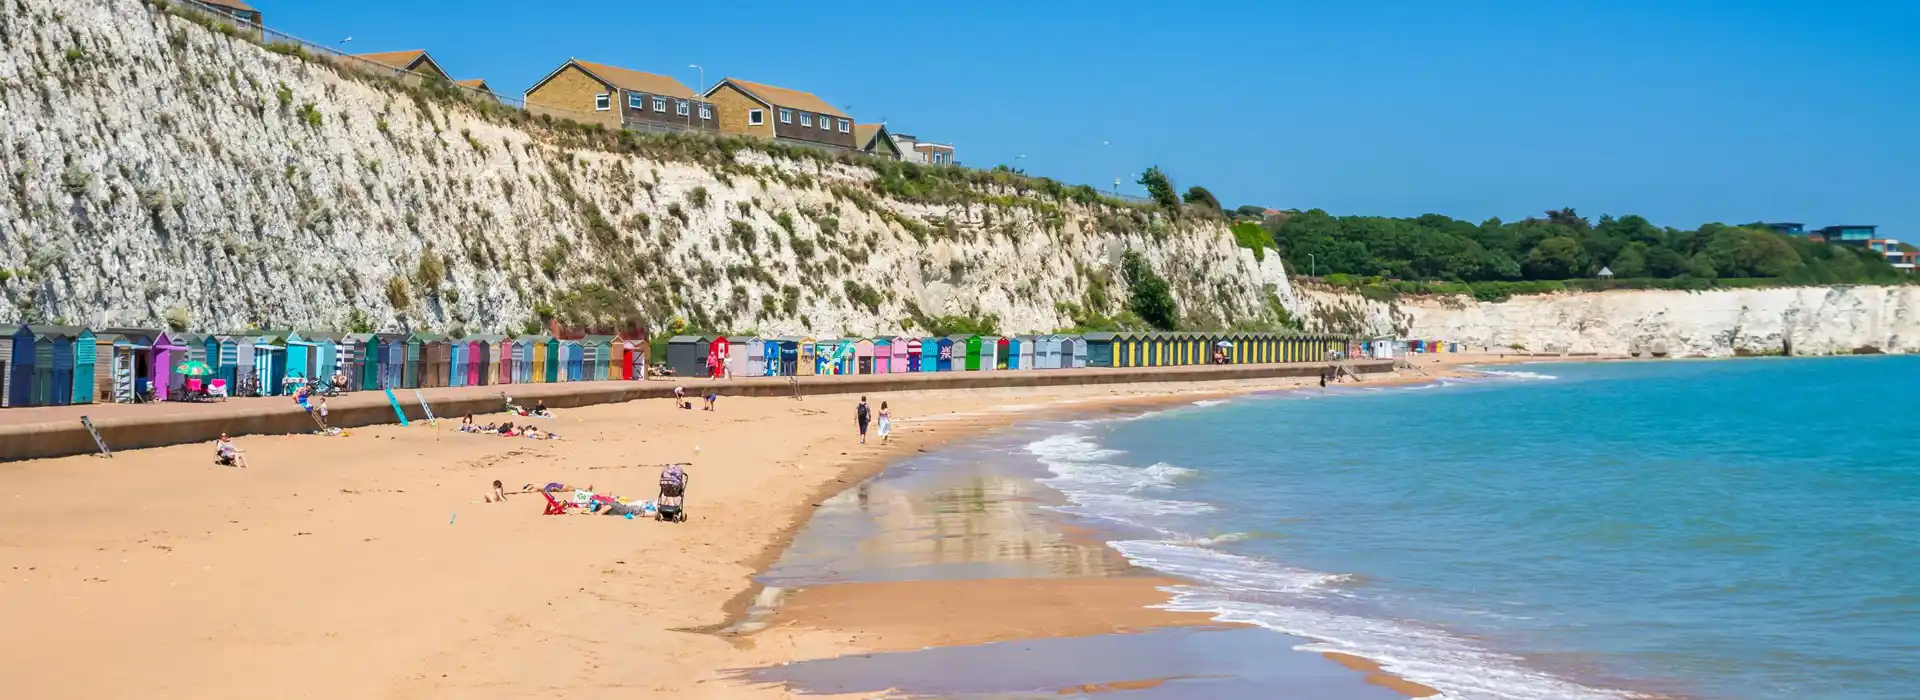 Holiday parks in Kent